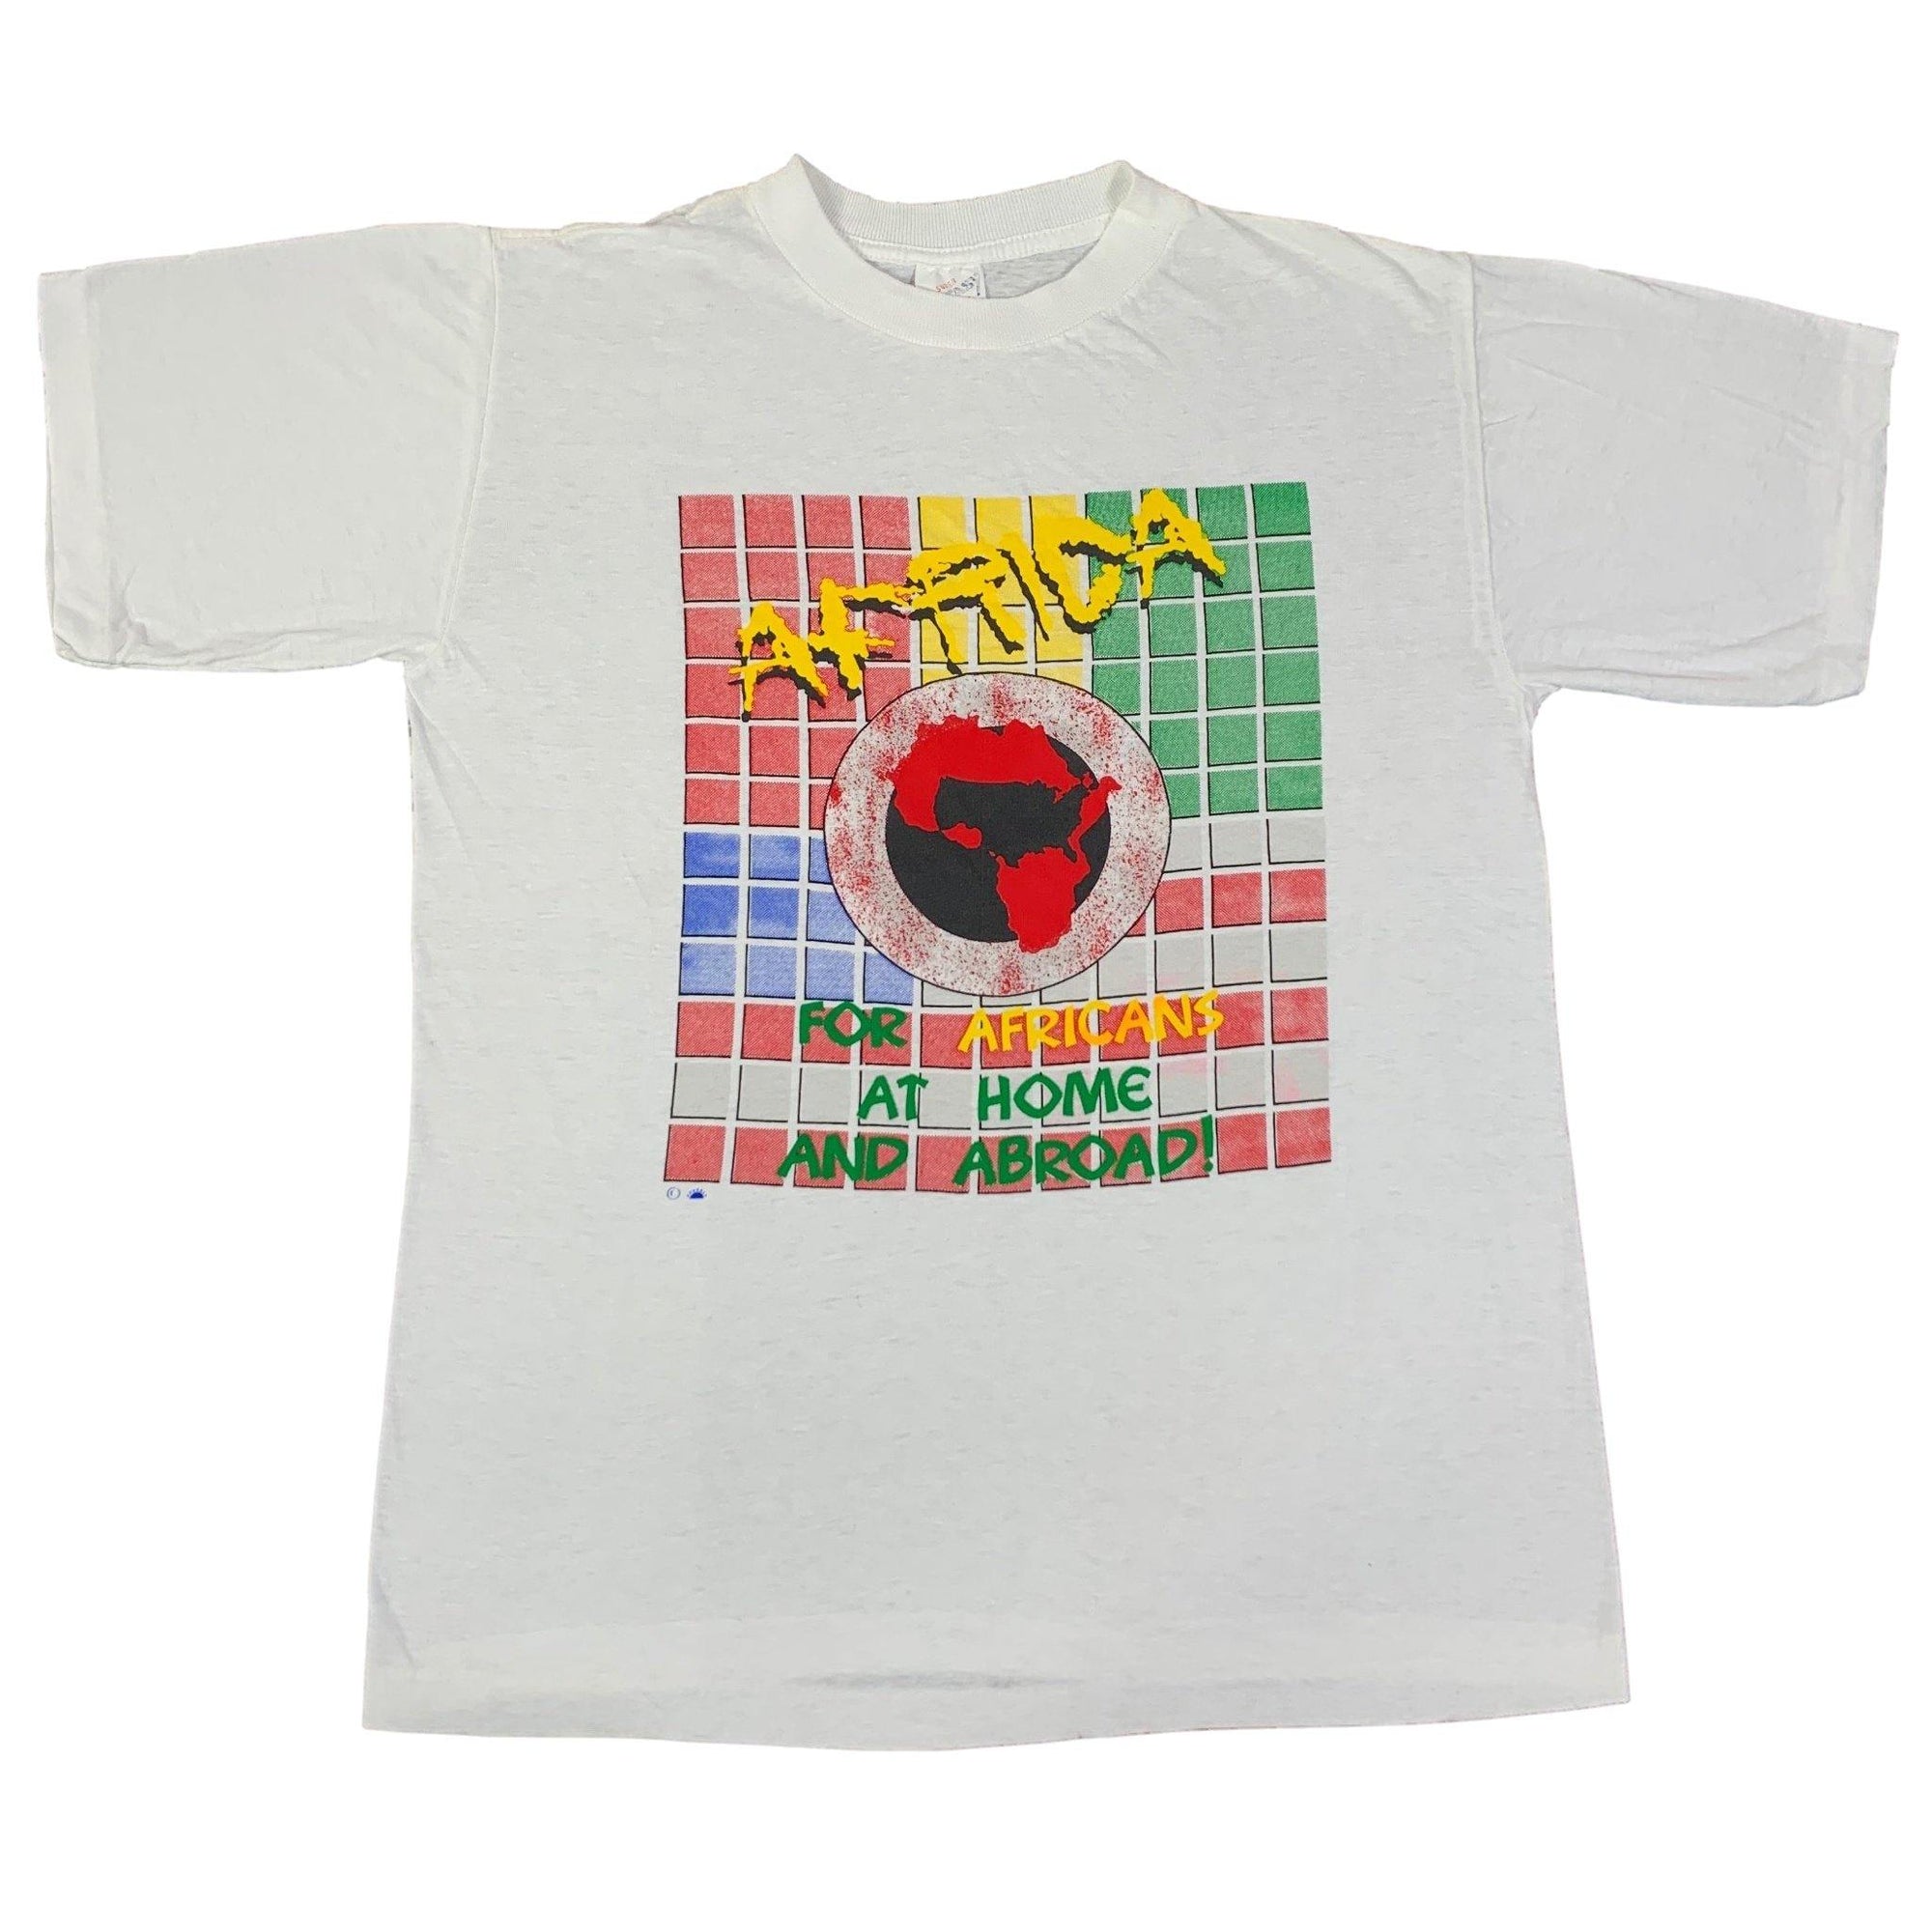 Vintage Africa "Home And Abroad" T-Shirt - jointcustodydc